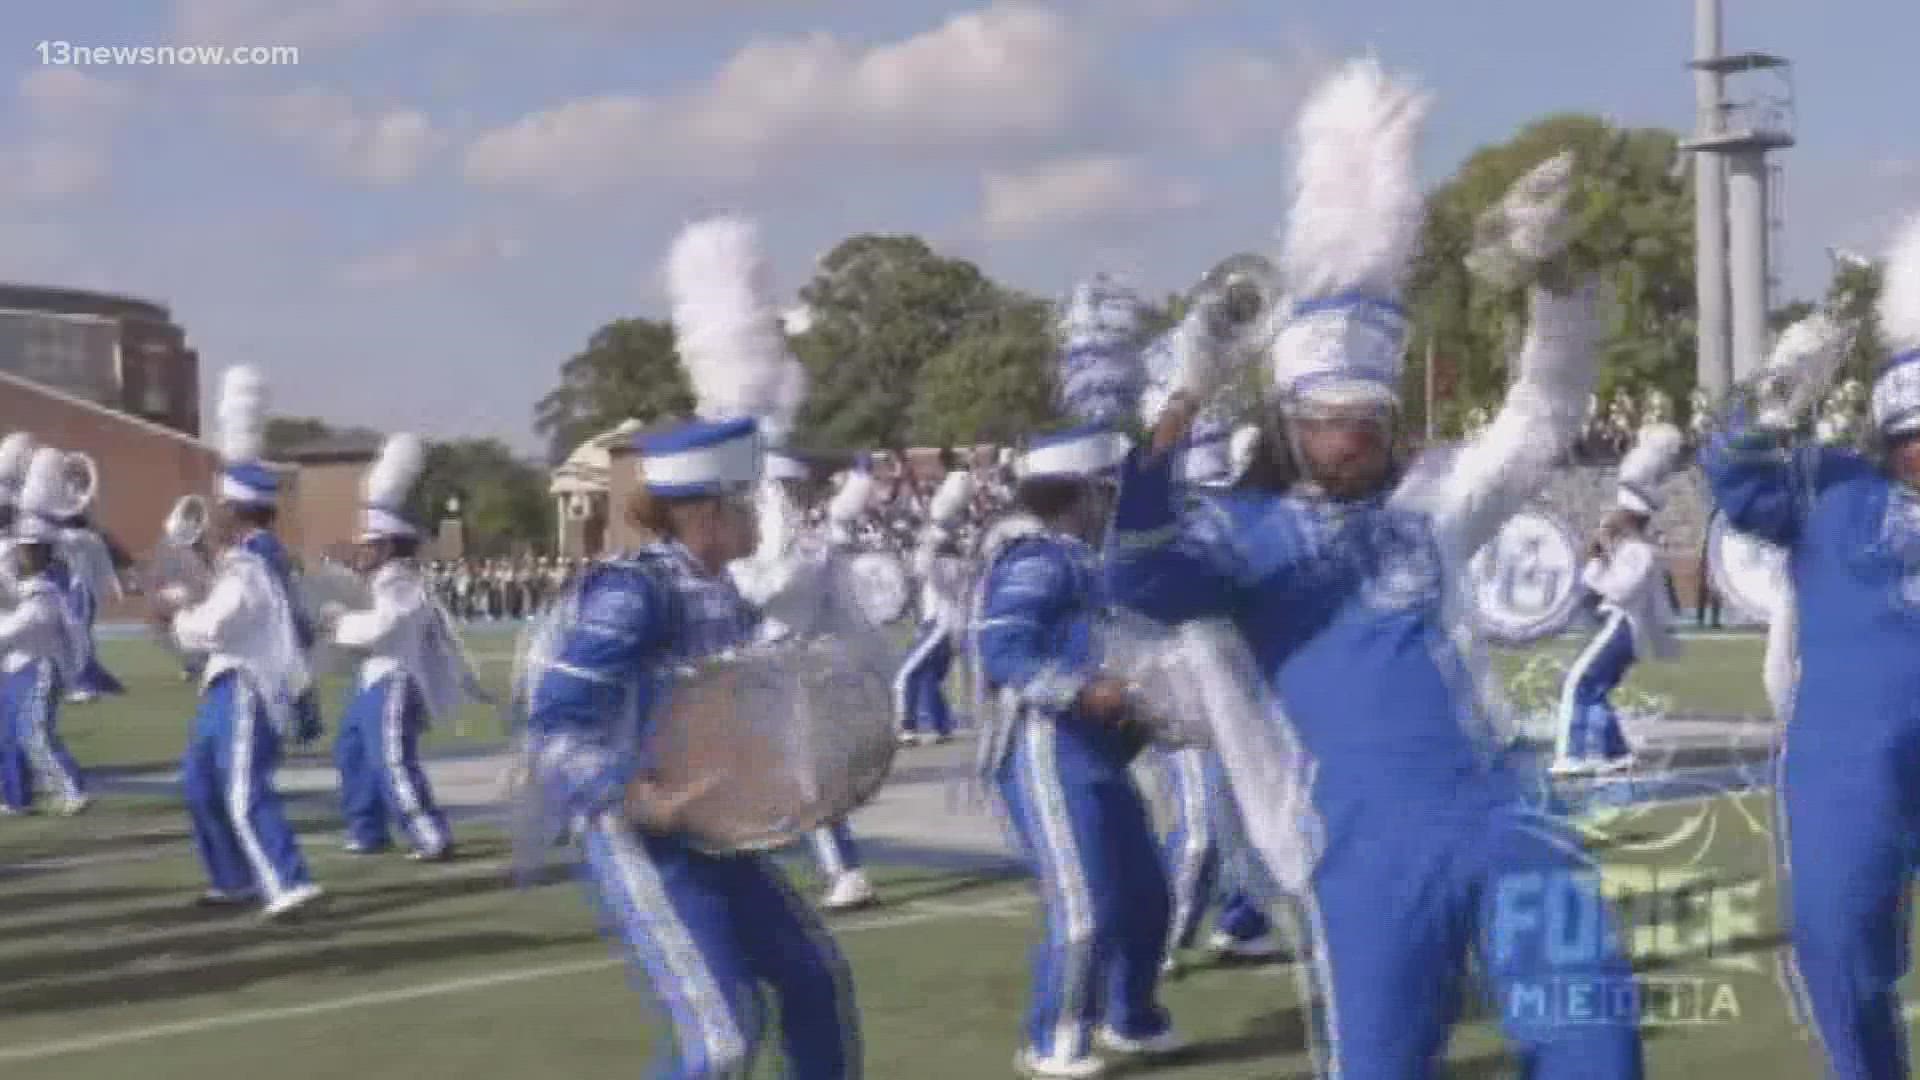 "You have a minute and fifteen seconds to show the world what you can do." Hampton University will be the only HBCU in the parade this year.